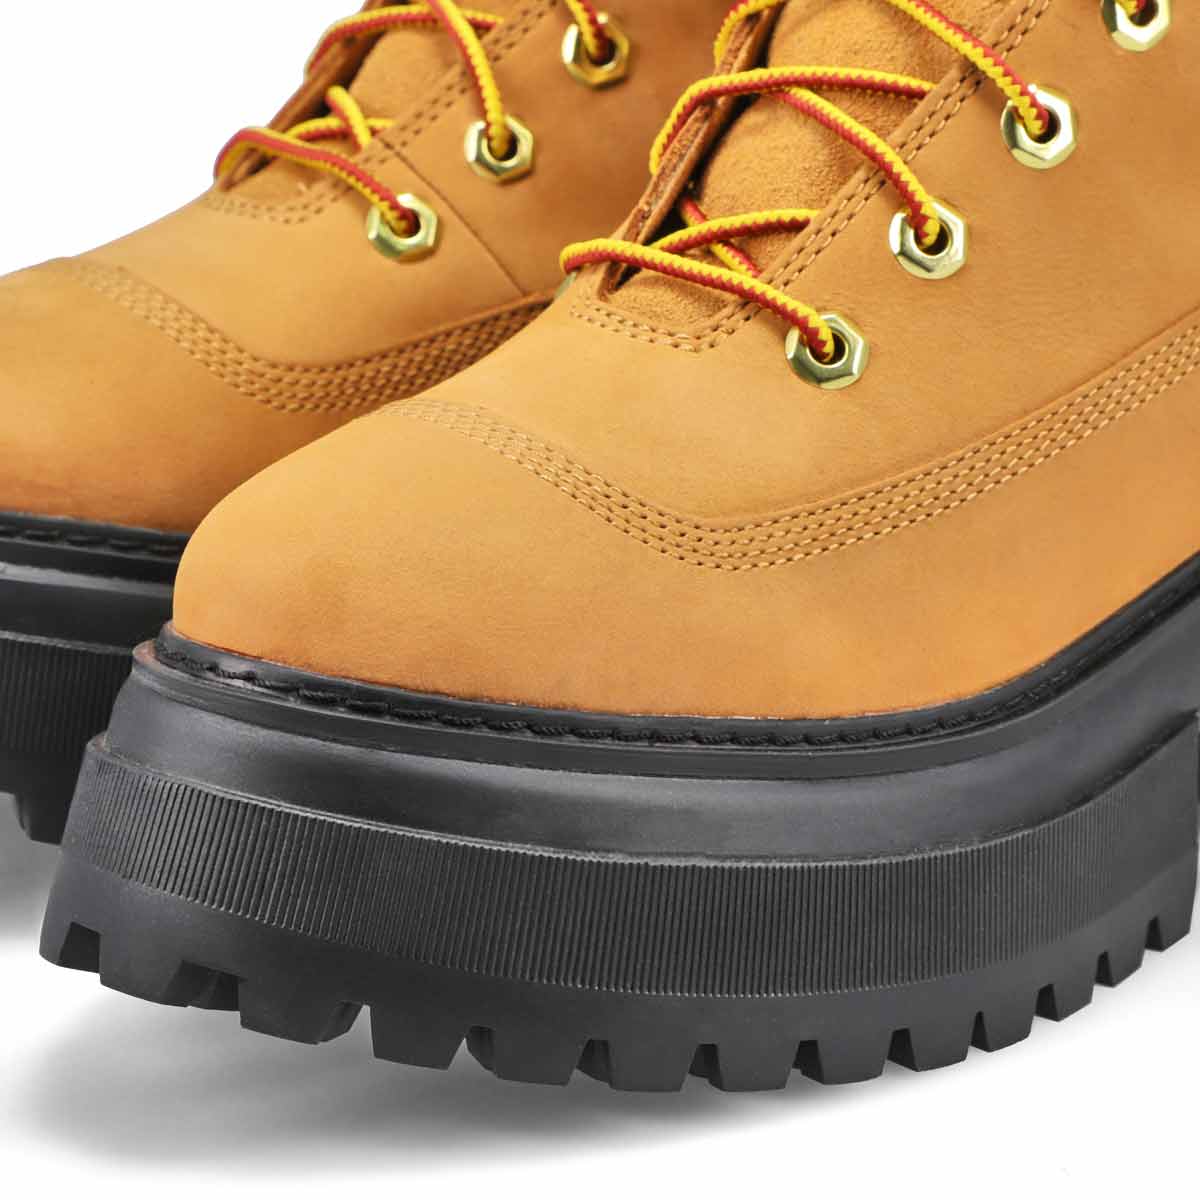 Women's Sky 6 Lace Up Boot - Wheat